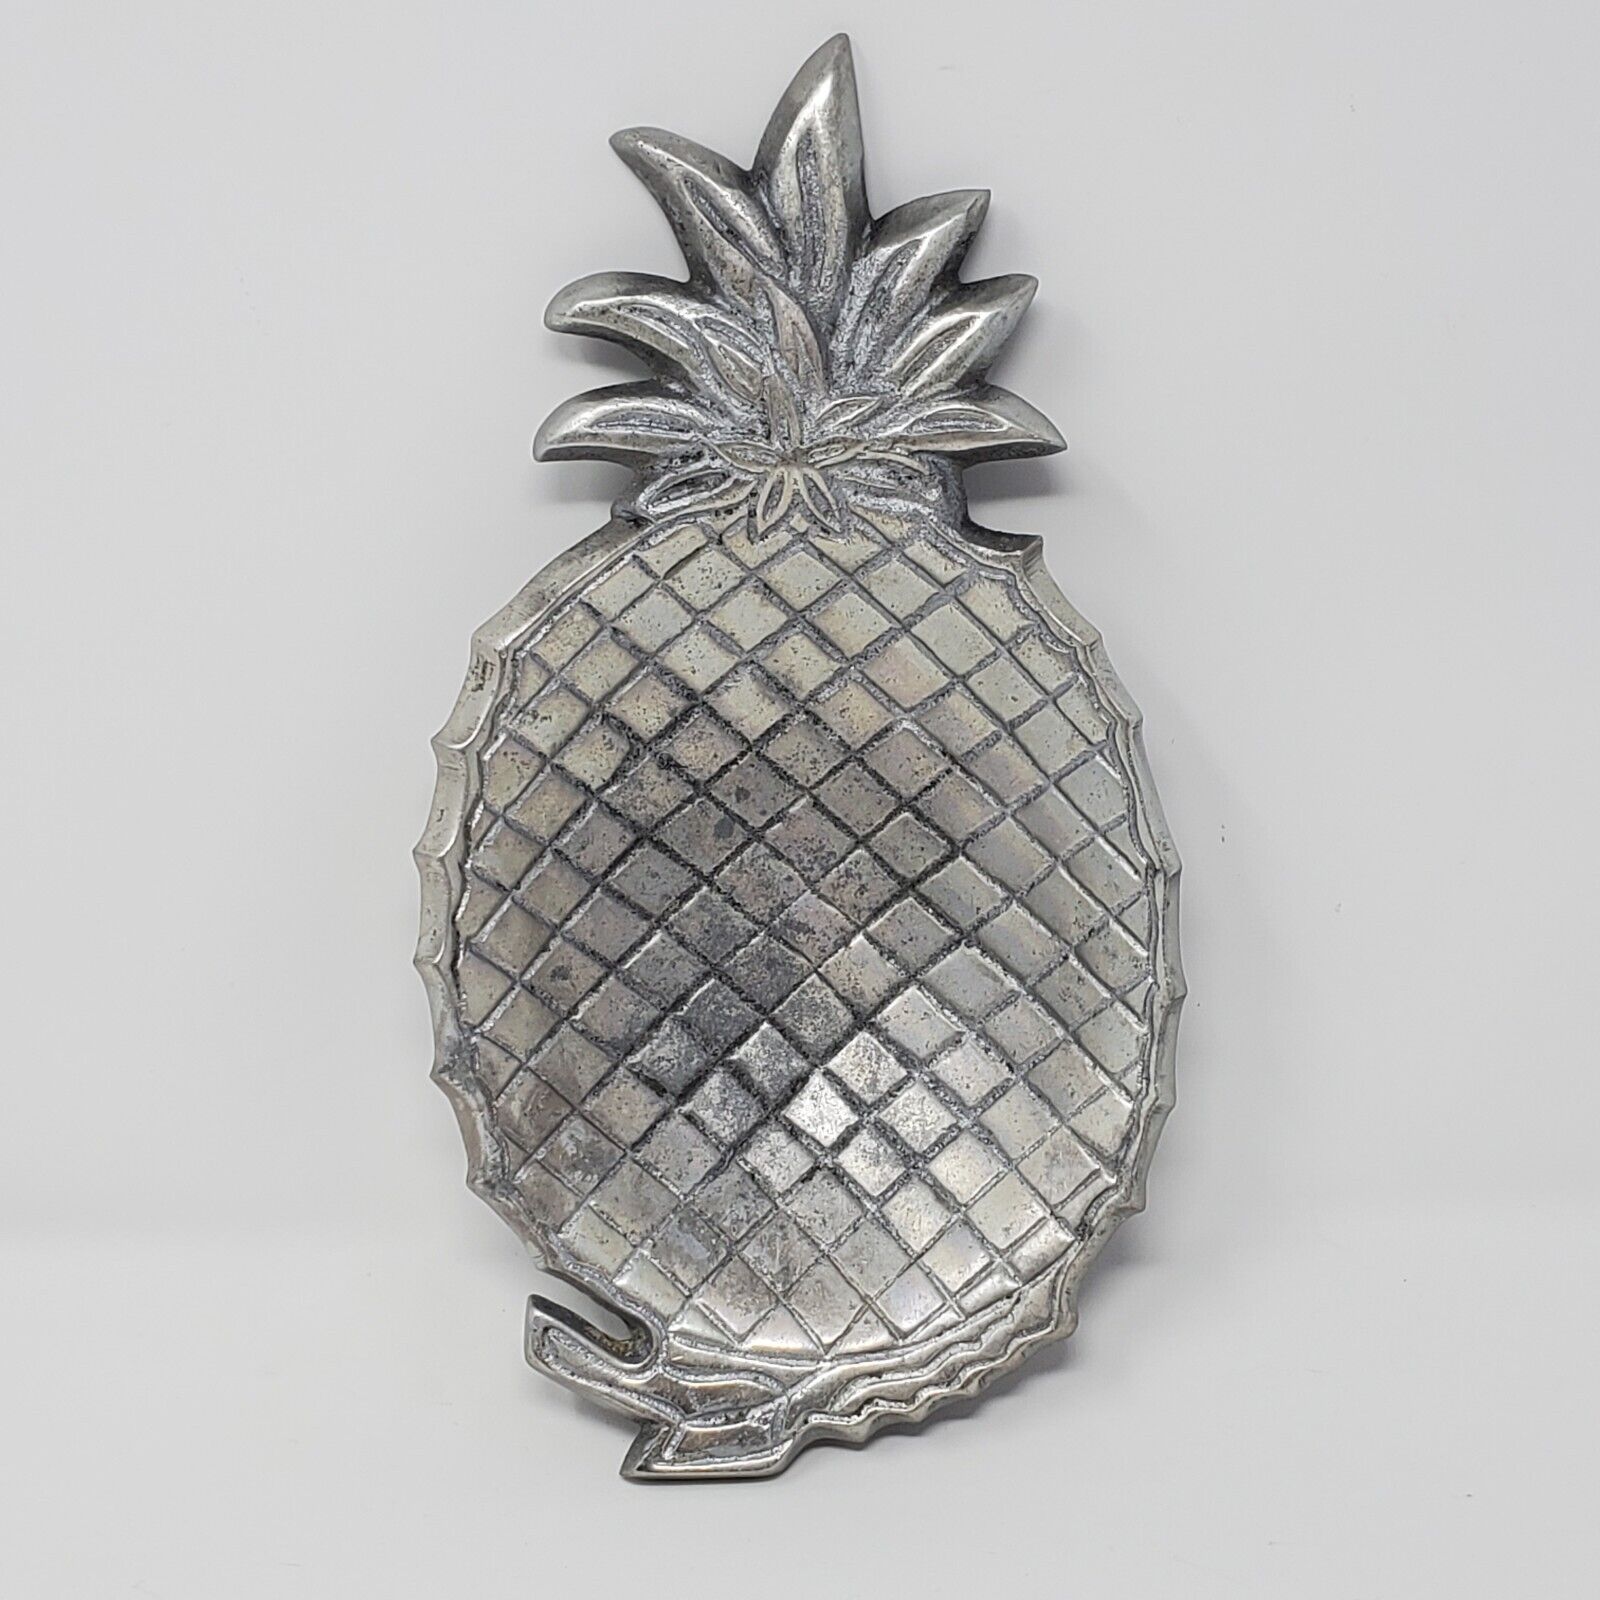 Pewter Metal Pineapple Shaped Serving Tray Spoon Rest Trinket Dish READ